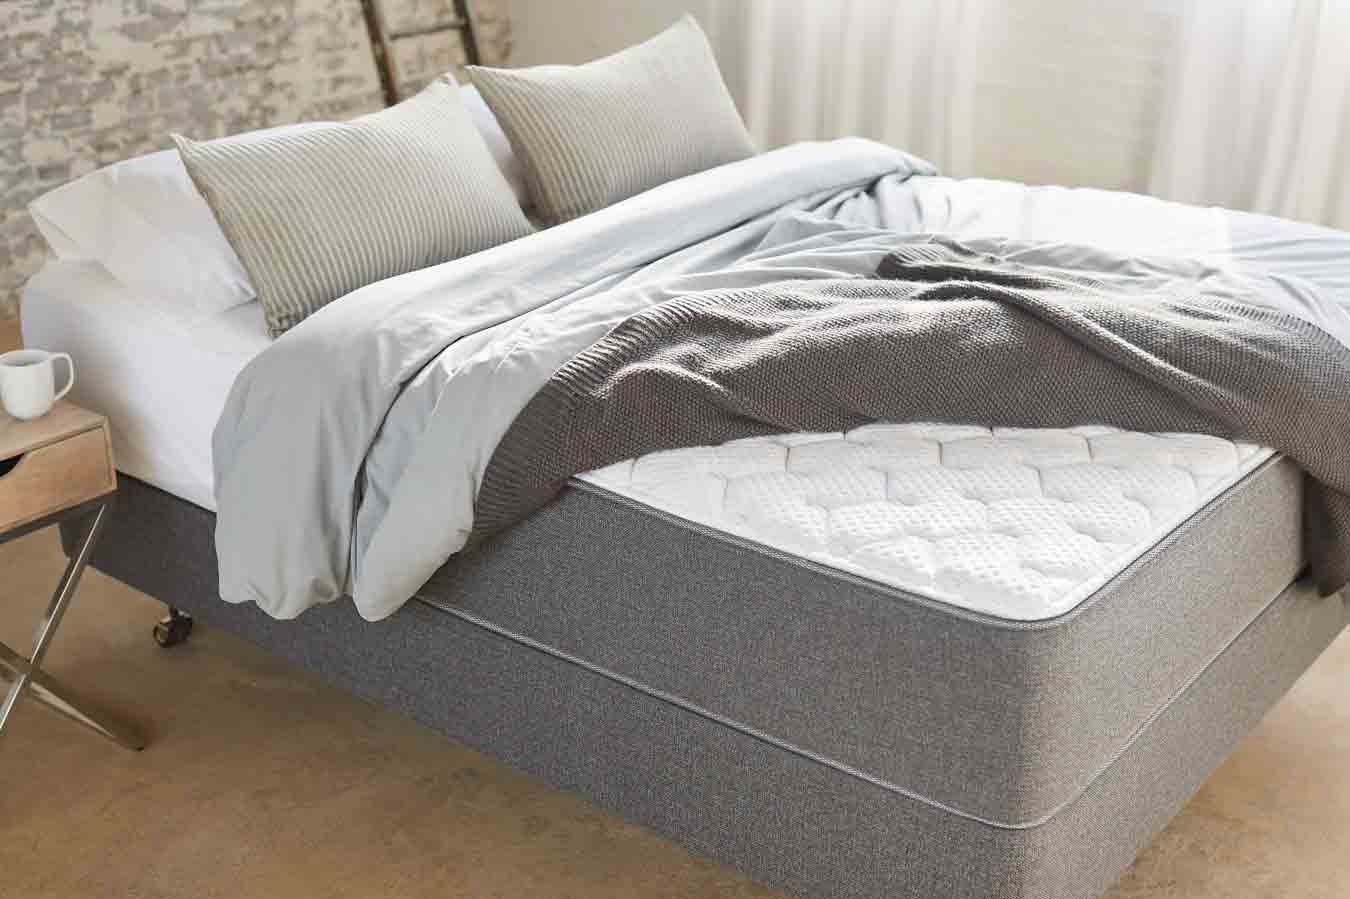 7 Things You Need To Know Before You Buy The Best Mattress